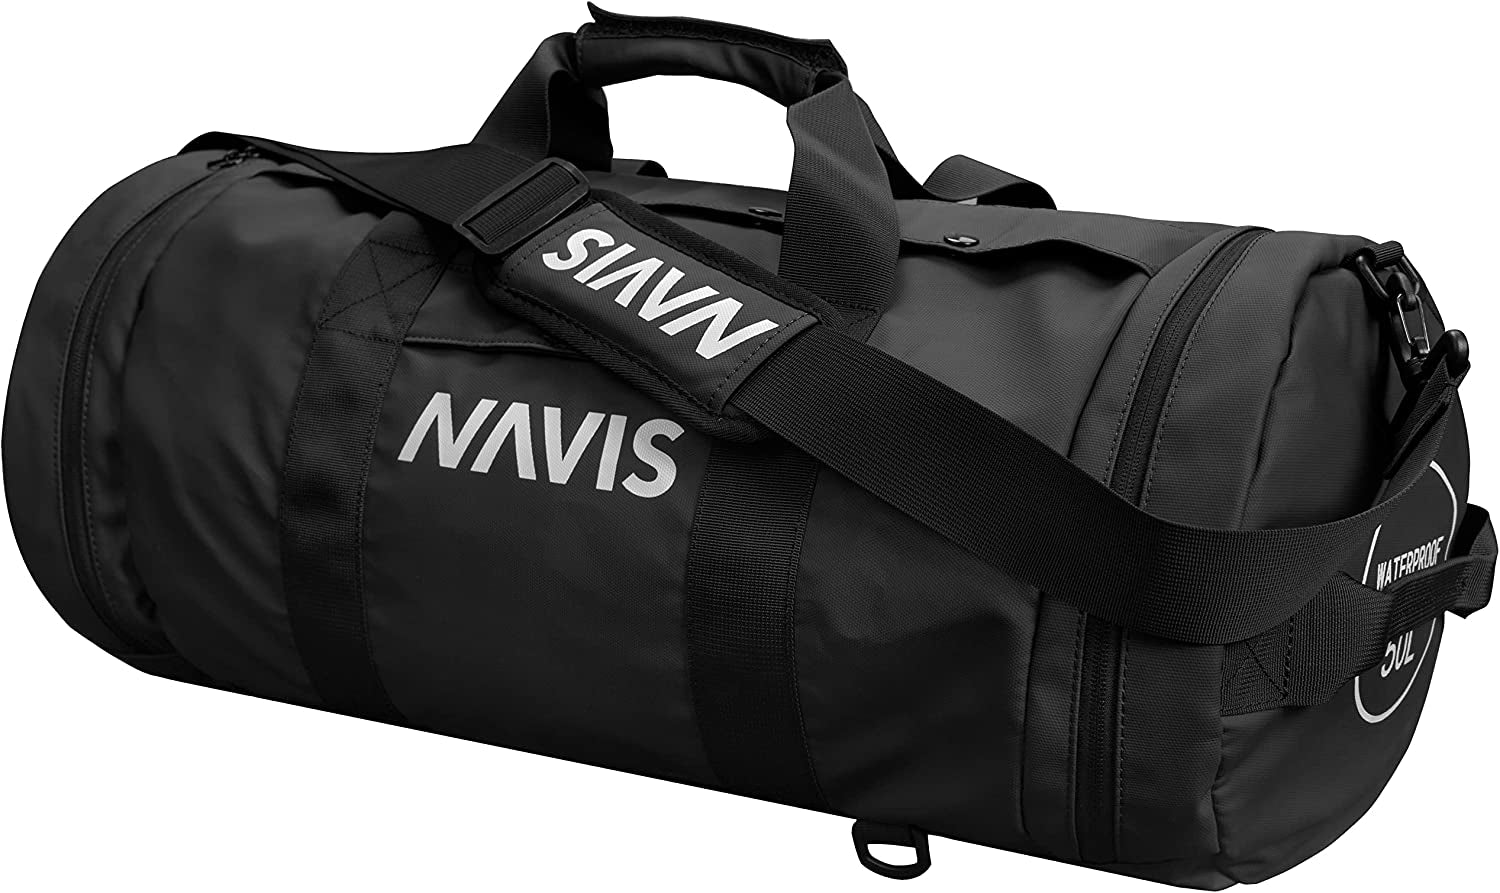  Gonex 40L Extra Large Waterproof Duffle Travel Dry Duffel Bag  Heavy Duty Bag with Durable Straps & Handles for Kayaking Paddleboarding  Boating Rafting Fishing Black : Sports & Outdoors